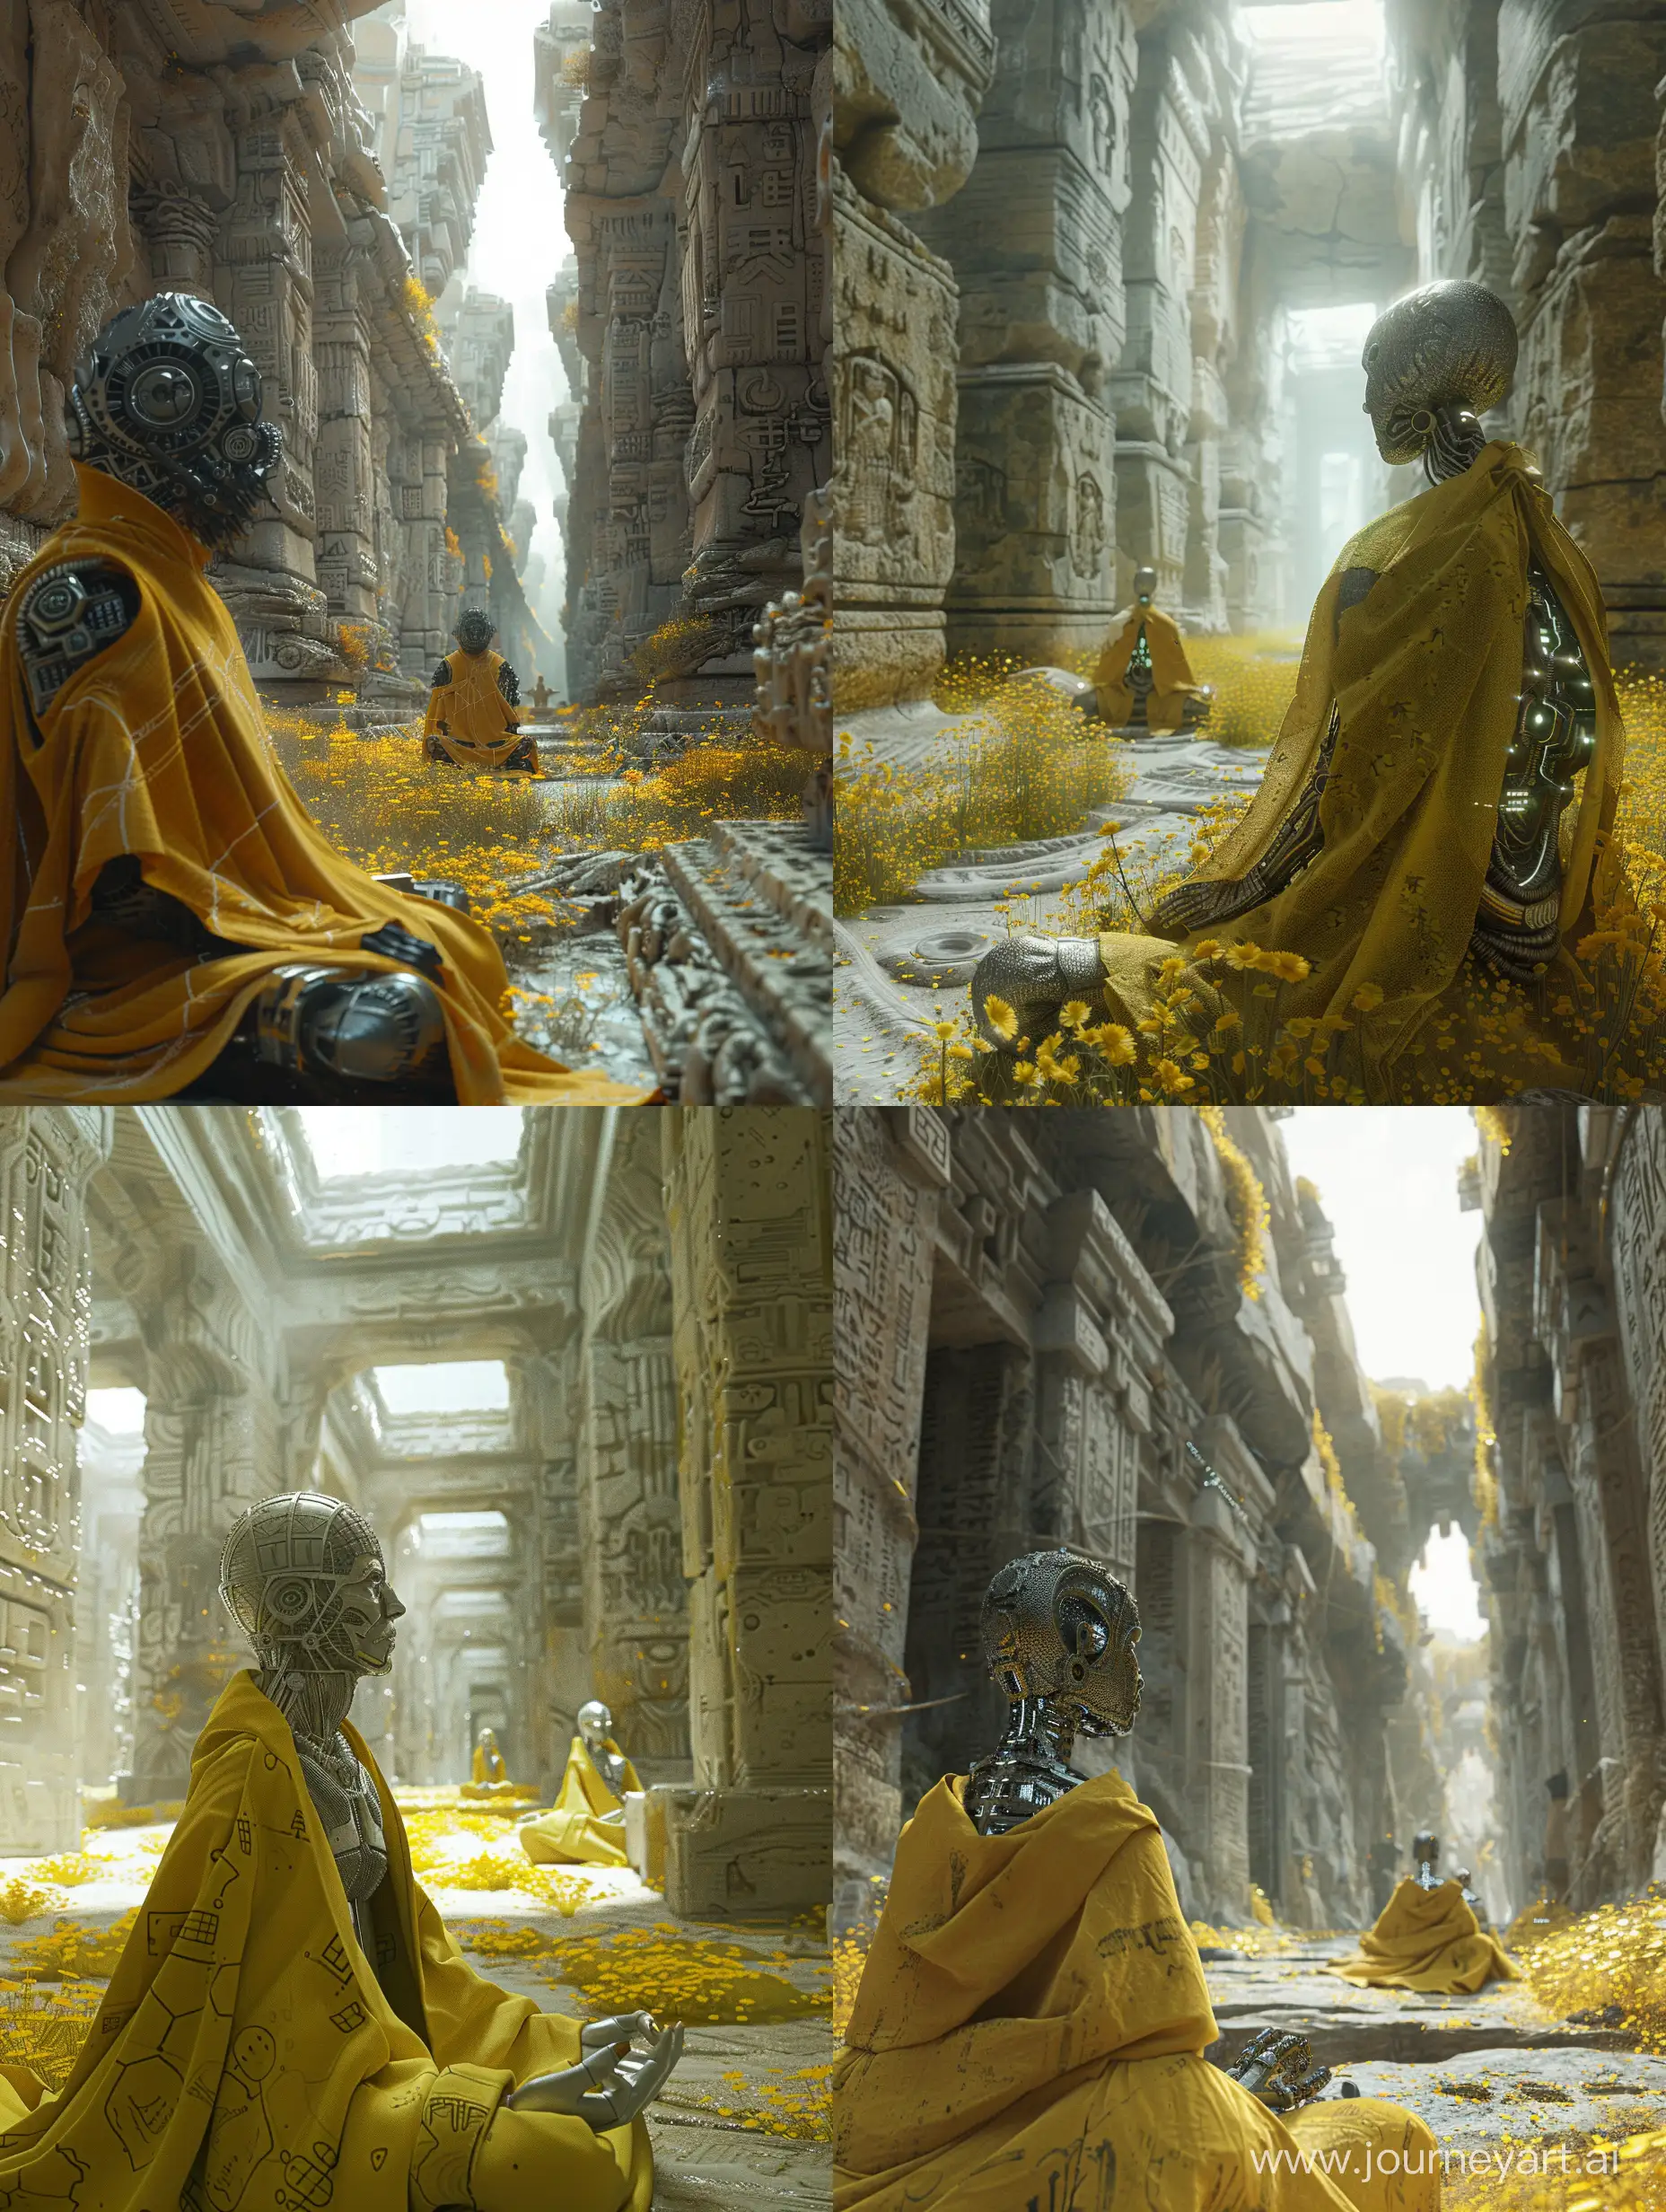  machines, machine parts, machine monks, A scene of two machine monks meditating in an ancient stone corridor overgrown with golden flowers,. The foreground monk has intricate details visible on its body under the yellow cloak. The background monk sits further away, adding depth and mystery. The stone walls are carved with elaborate structures, suggesting a long-forgotten temple. Soft light filters through the openings above, creating a serene yet eerie atmosphere, cyberpunk